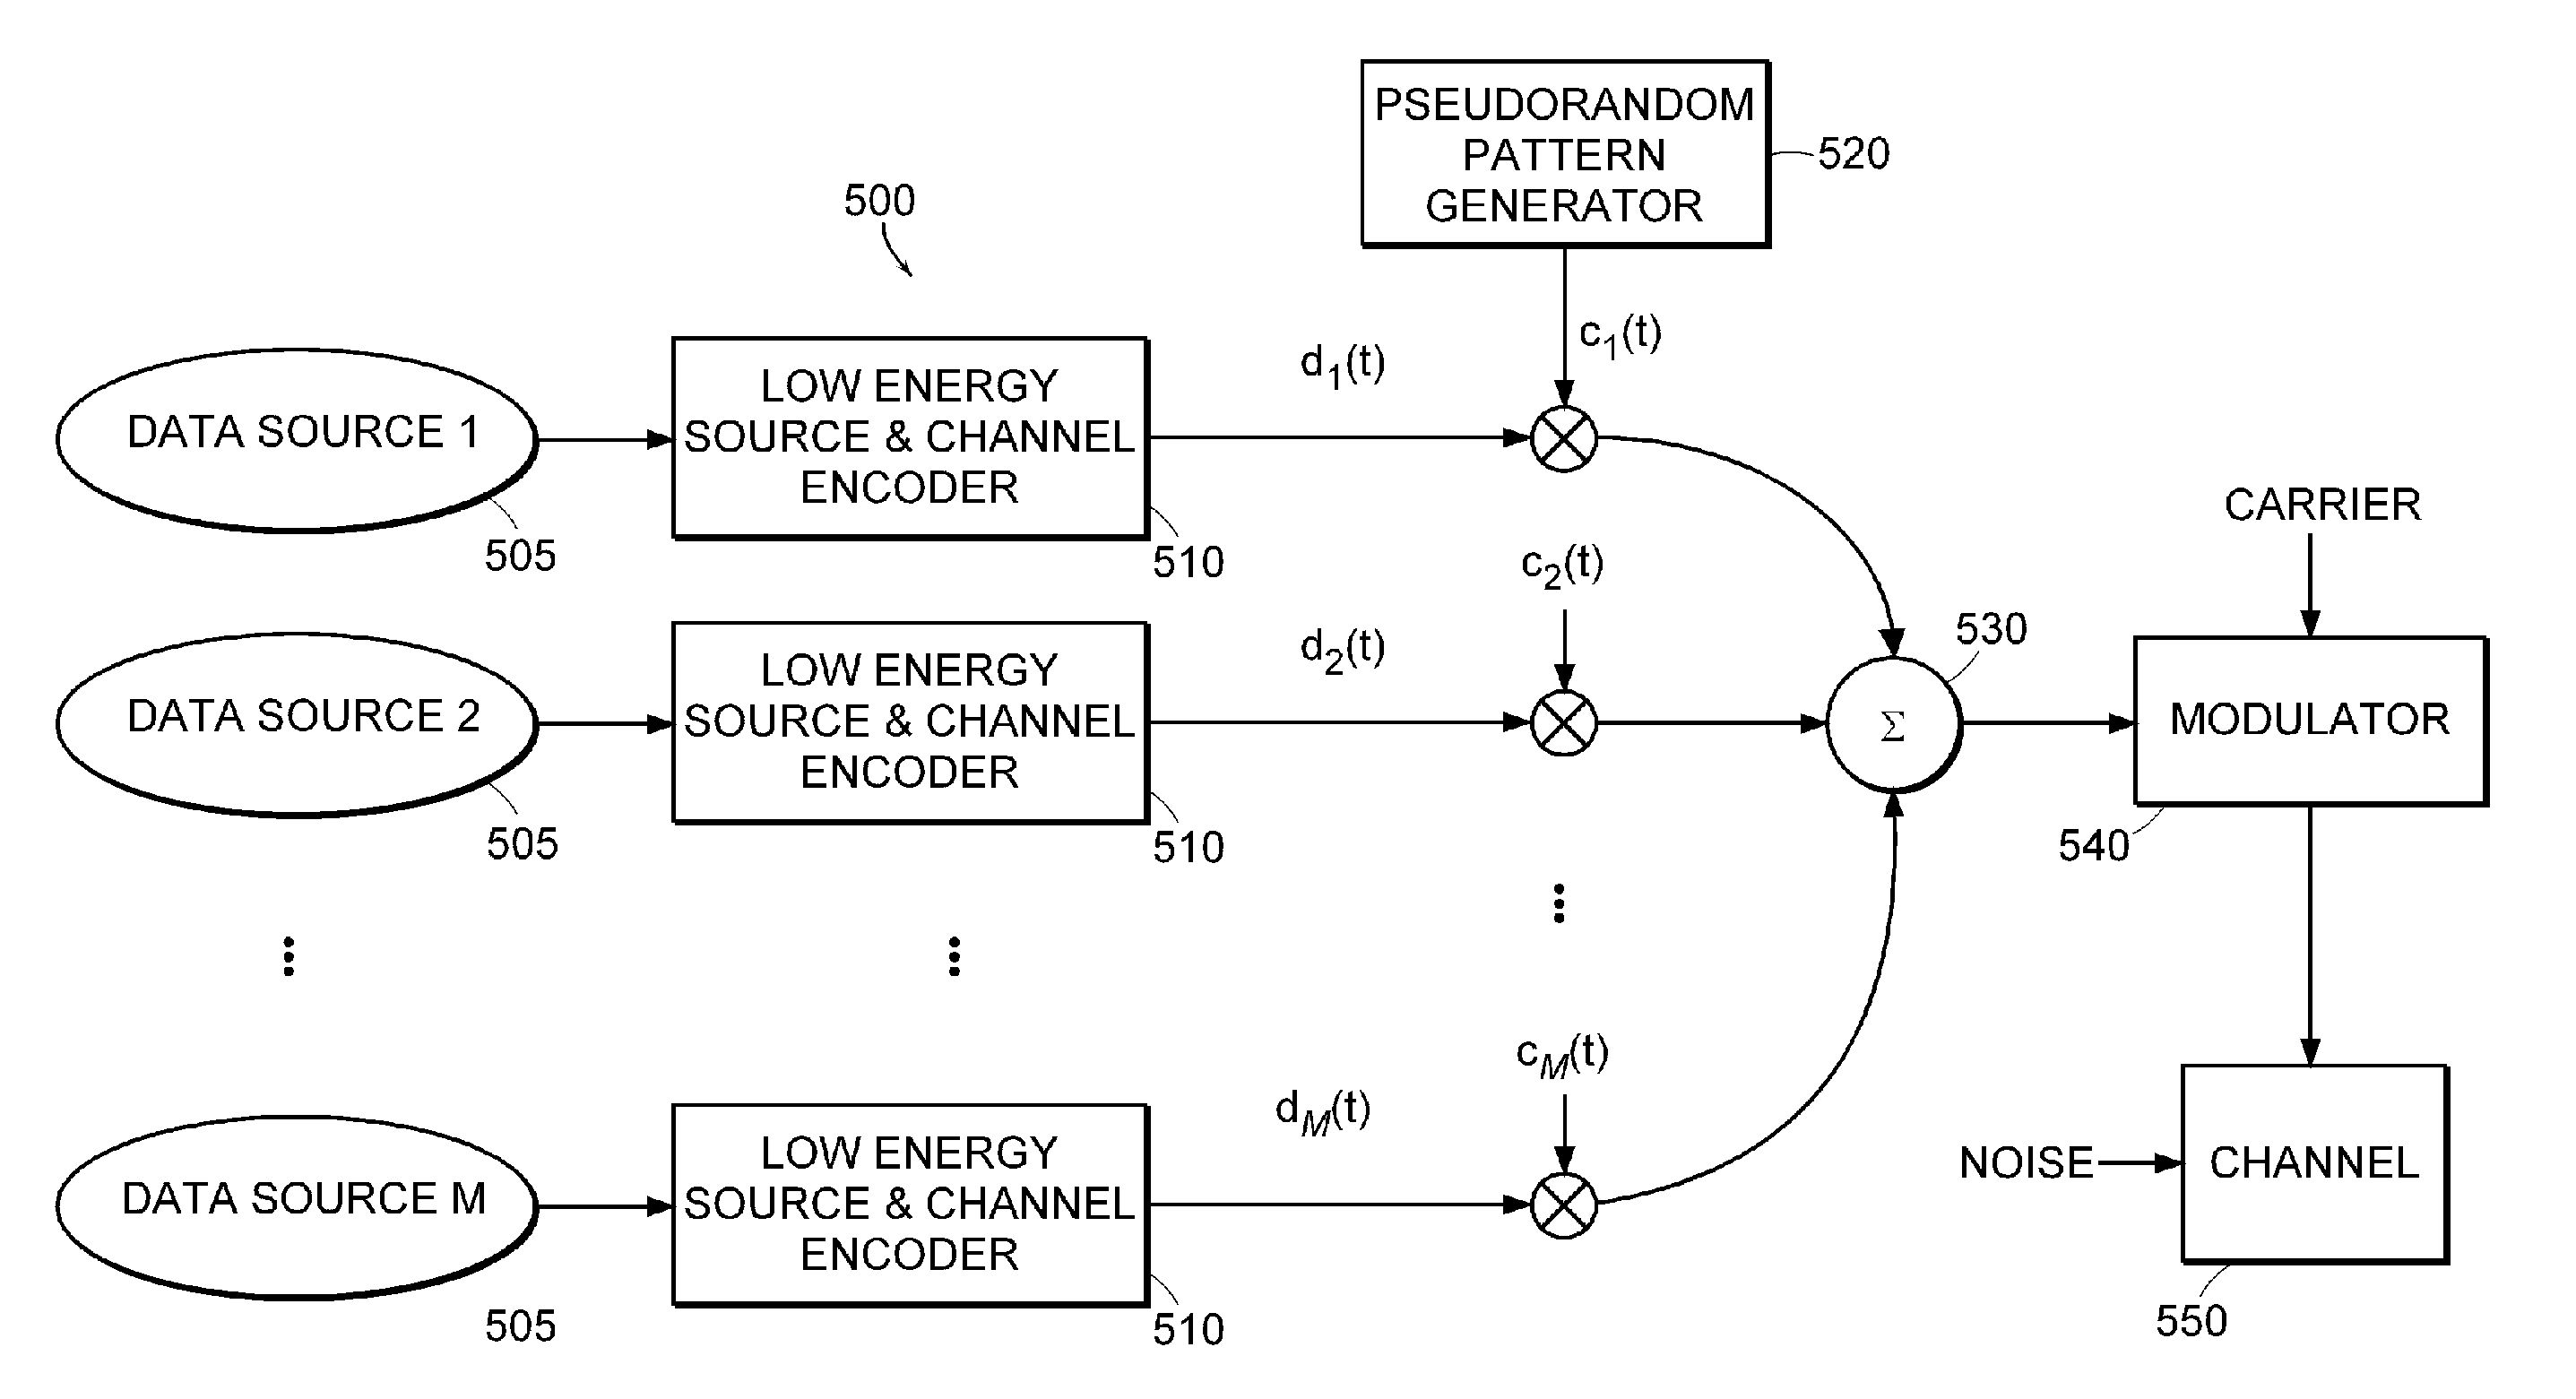 Source coding for interference reduction